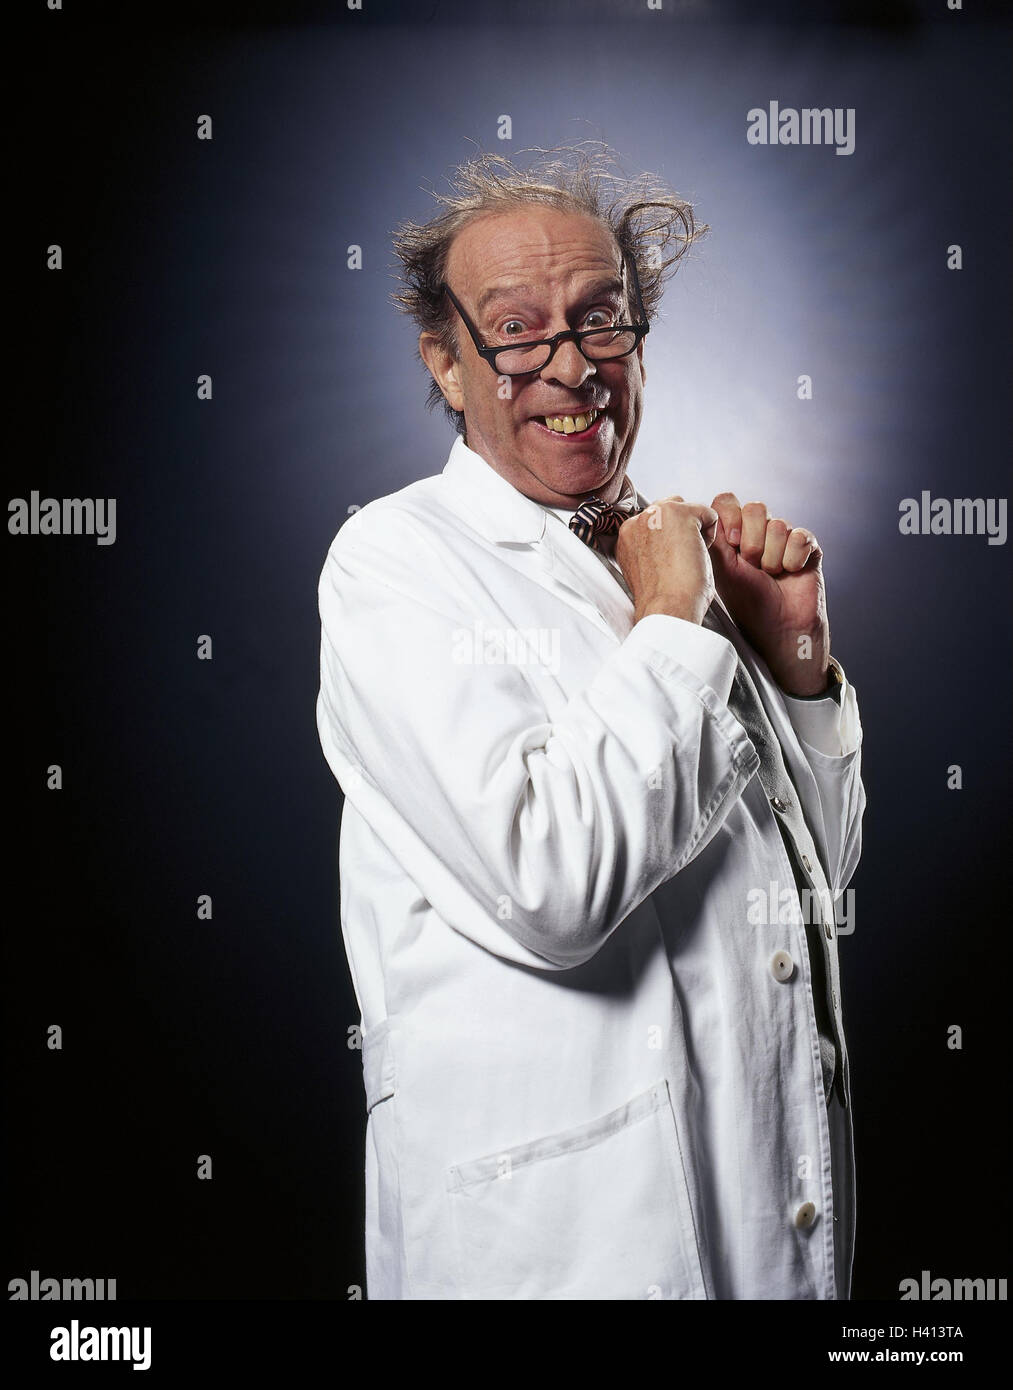 Boss, smock, white, glasses, waistcoat, gesture, joy, boss, man, old, studio, inside, doctor, chemist, doctor, professor, cogs, protrudingly, view, expression, confuses, crazily, moved, confusedly, confusion, delight, delights, near, Stock Photo